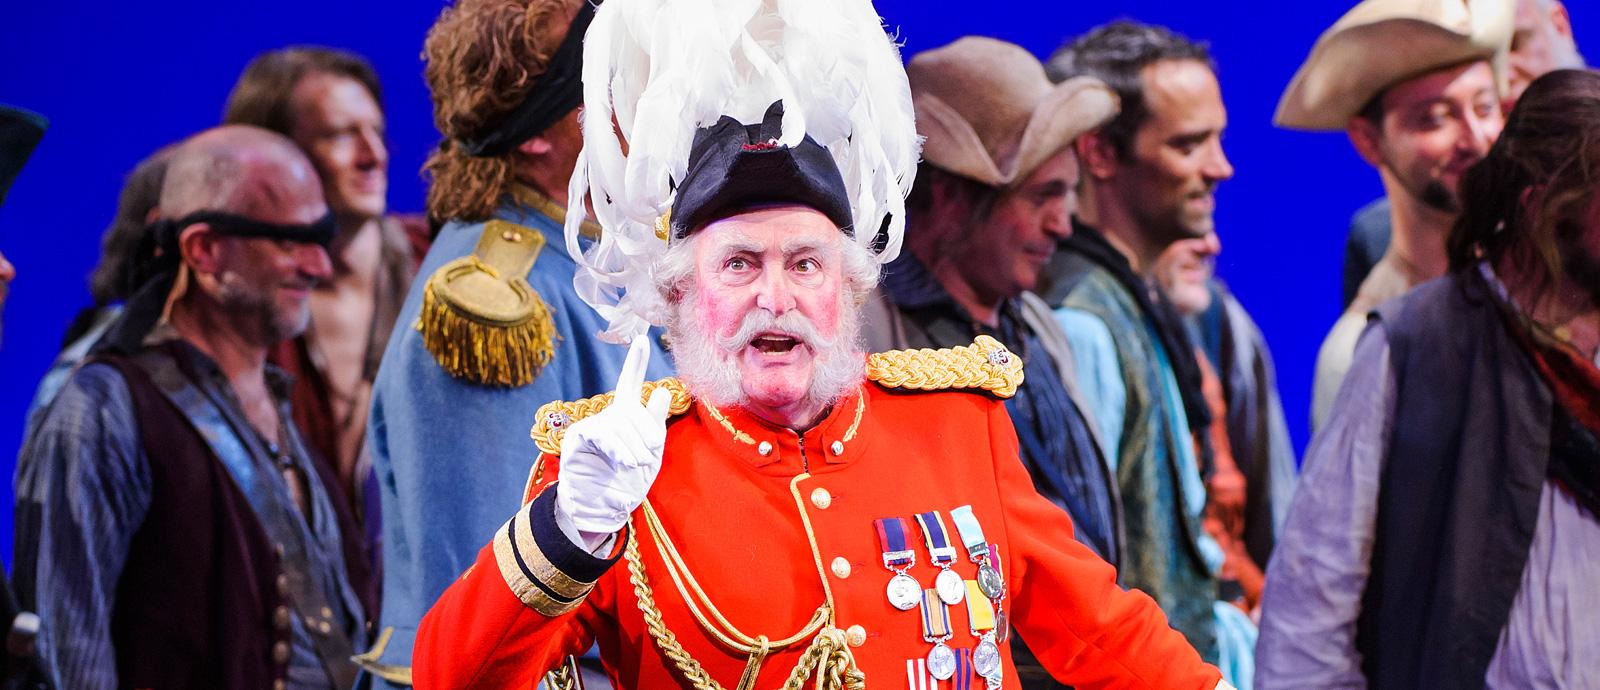 ENO's The Pirates of Penzance - Andrew Shore as The Major General. Photo by Tristram Kenton